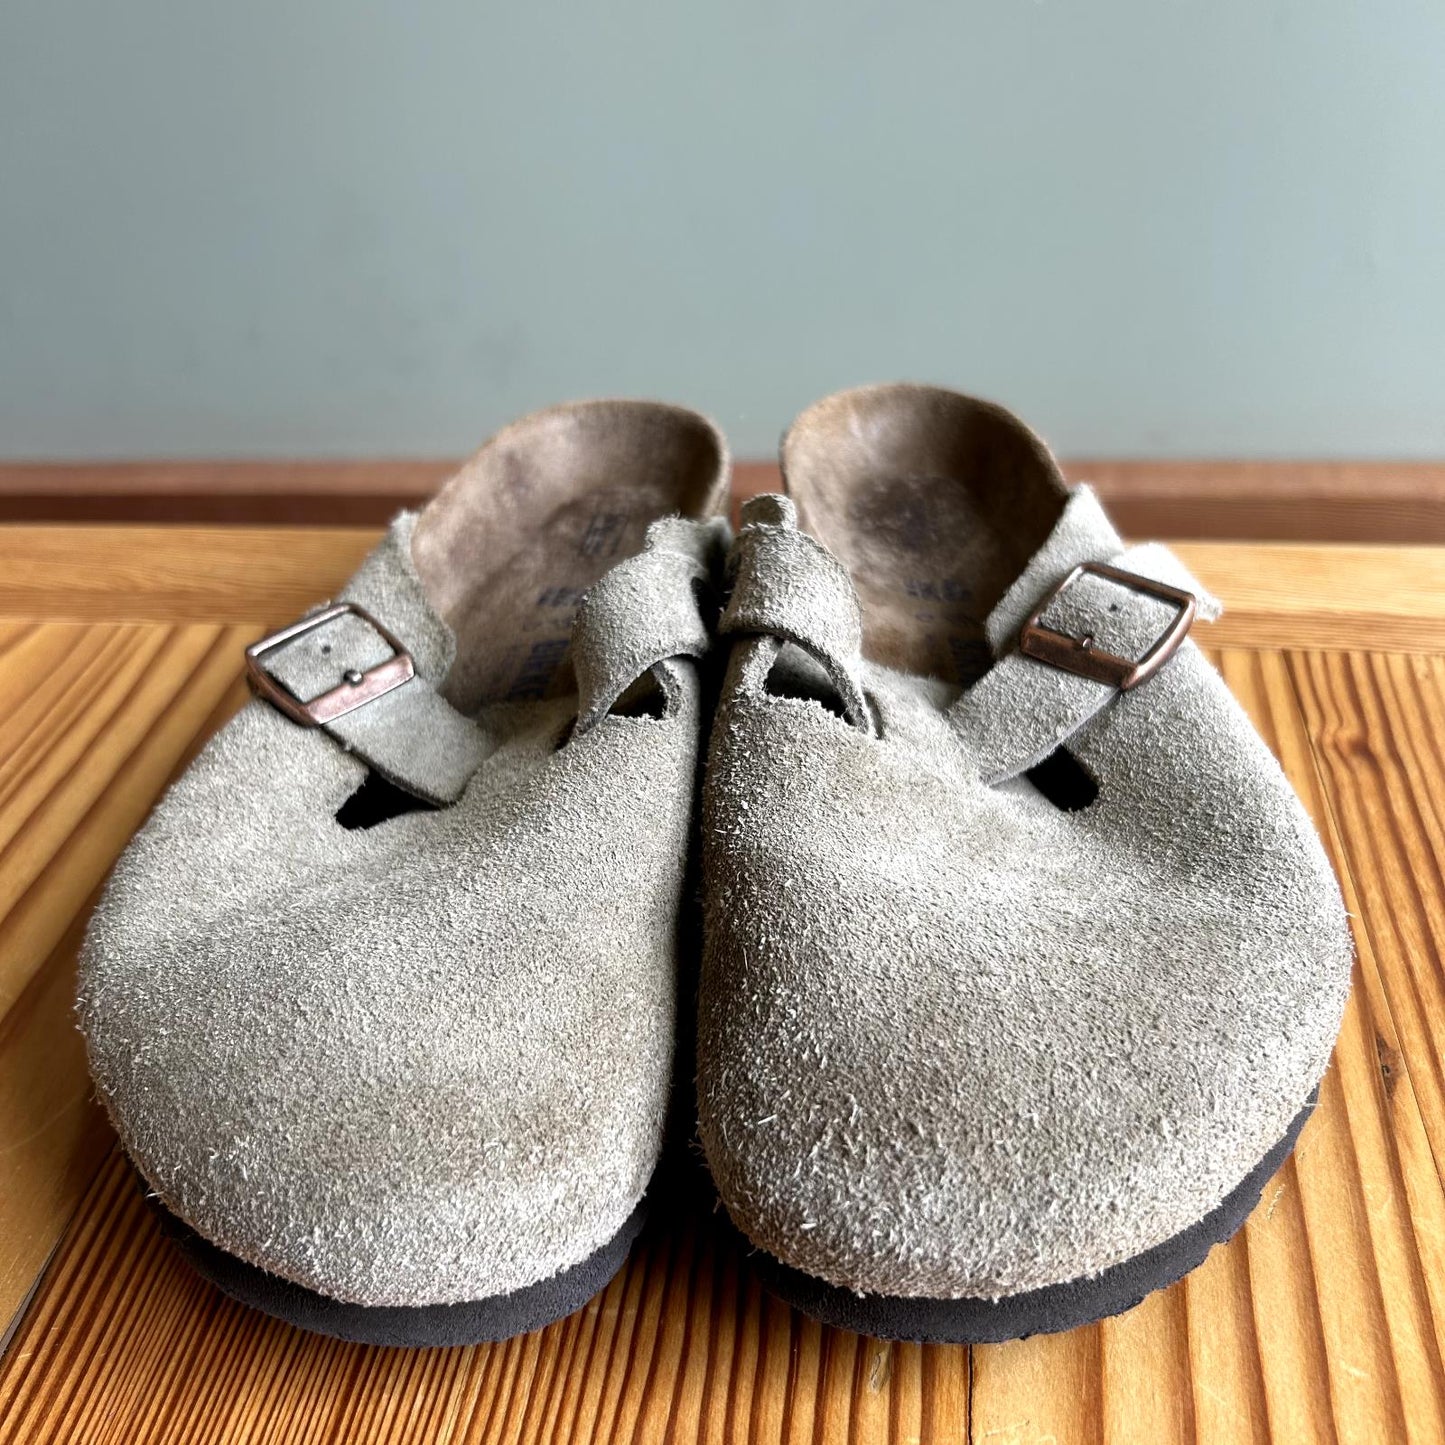 40 / 9 - Birkenstock Boston Clog Taupe Suede Leather Soft Footbed Shoes 3333MC